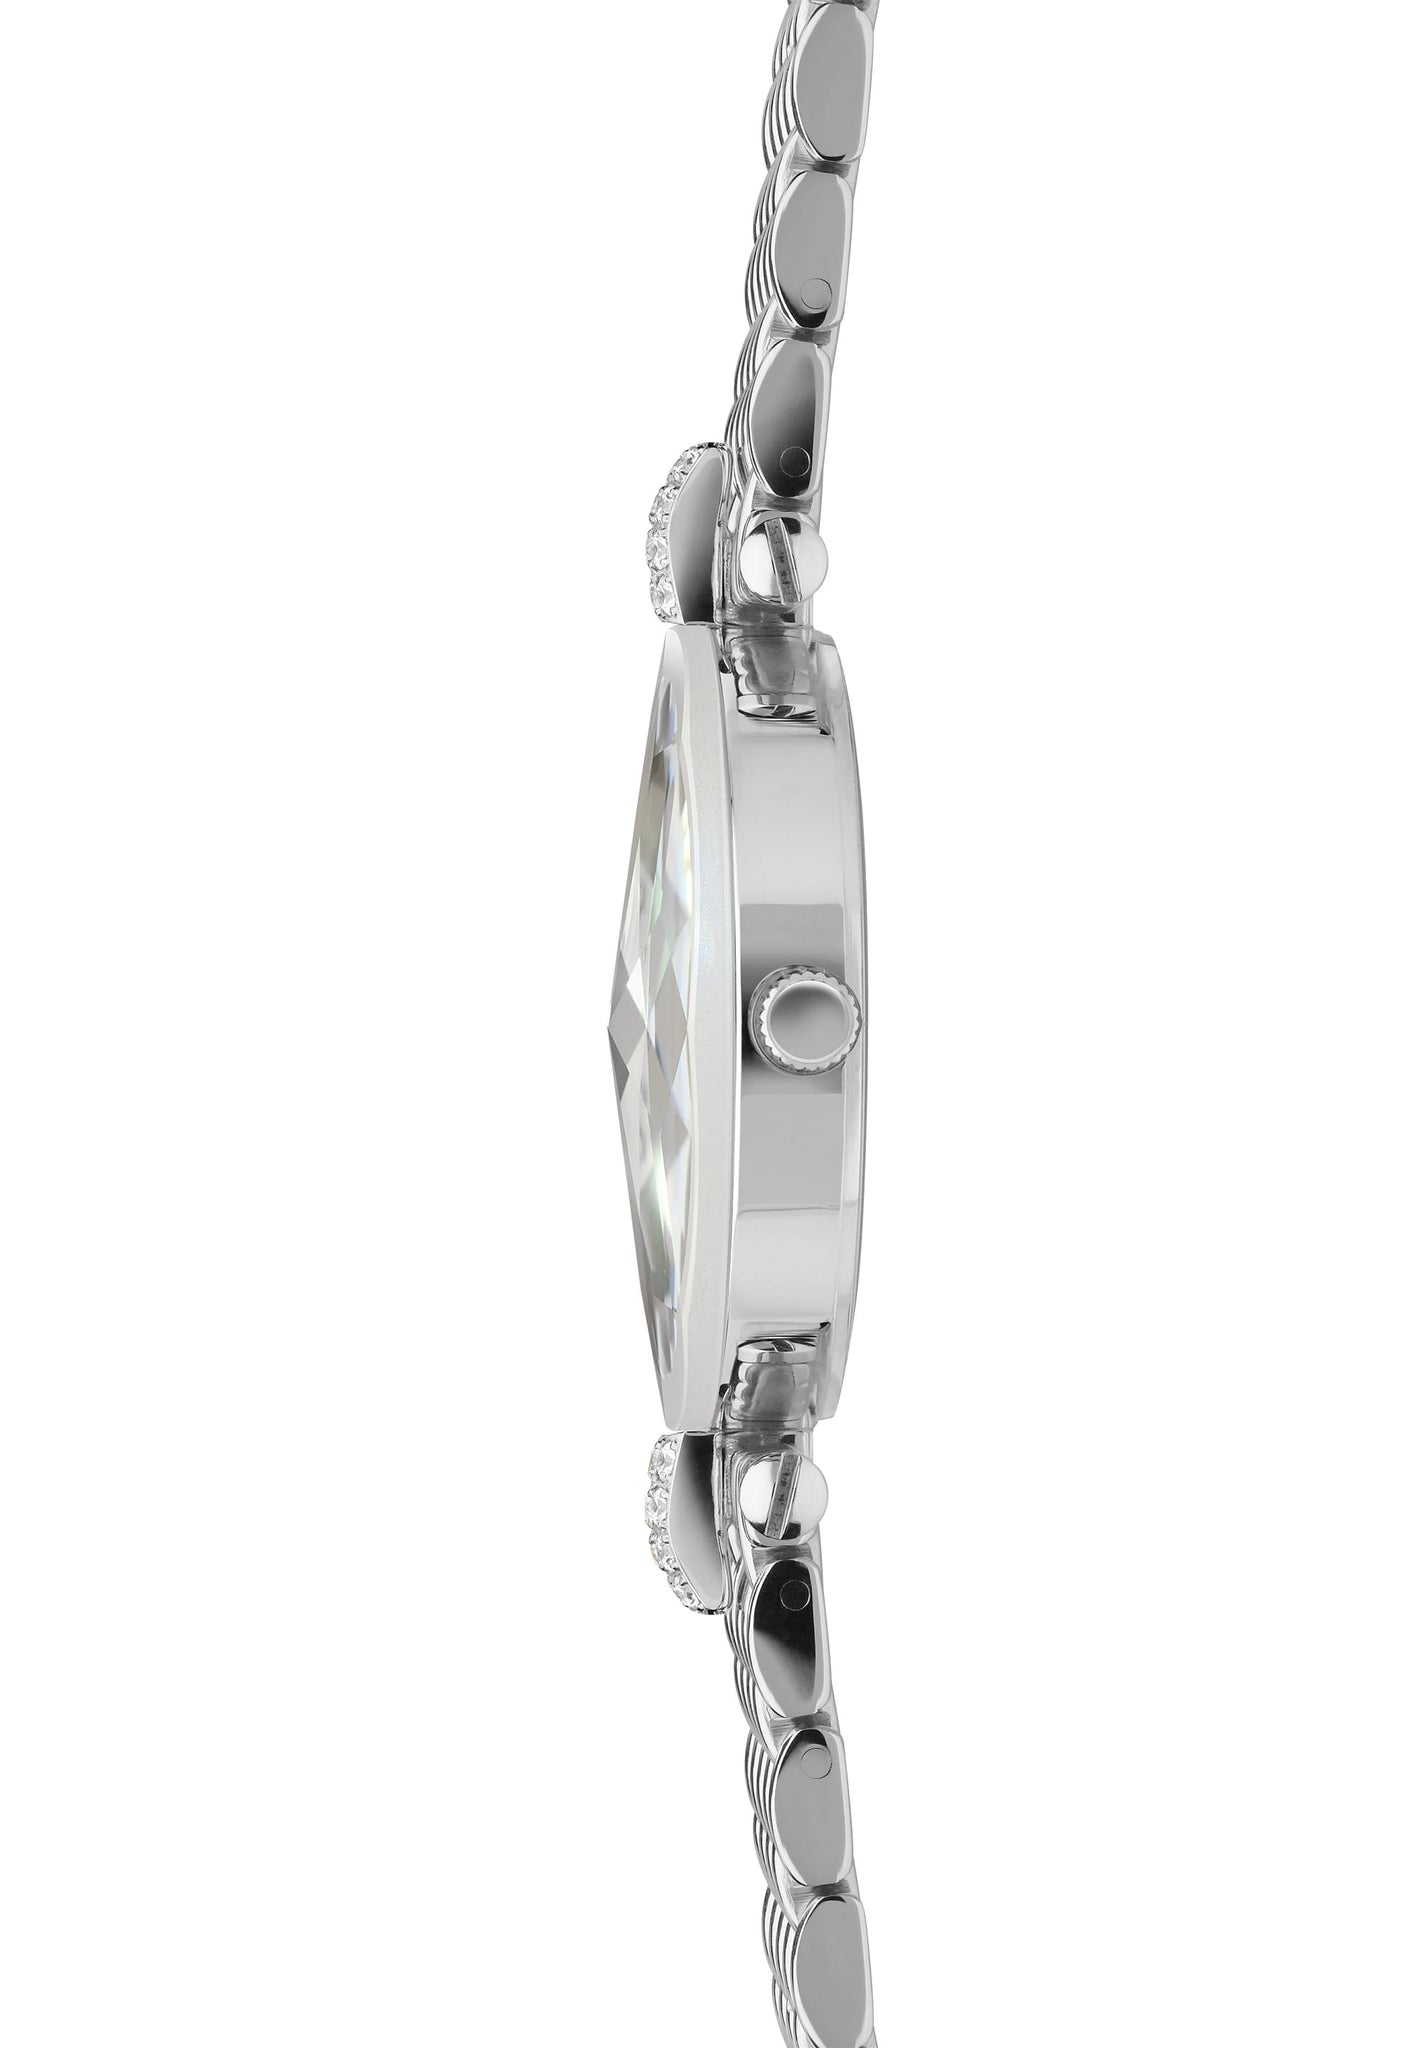 Facet Strass Reloj Mujer Suizo J5.636.M